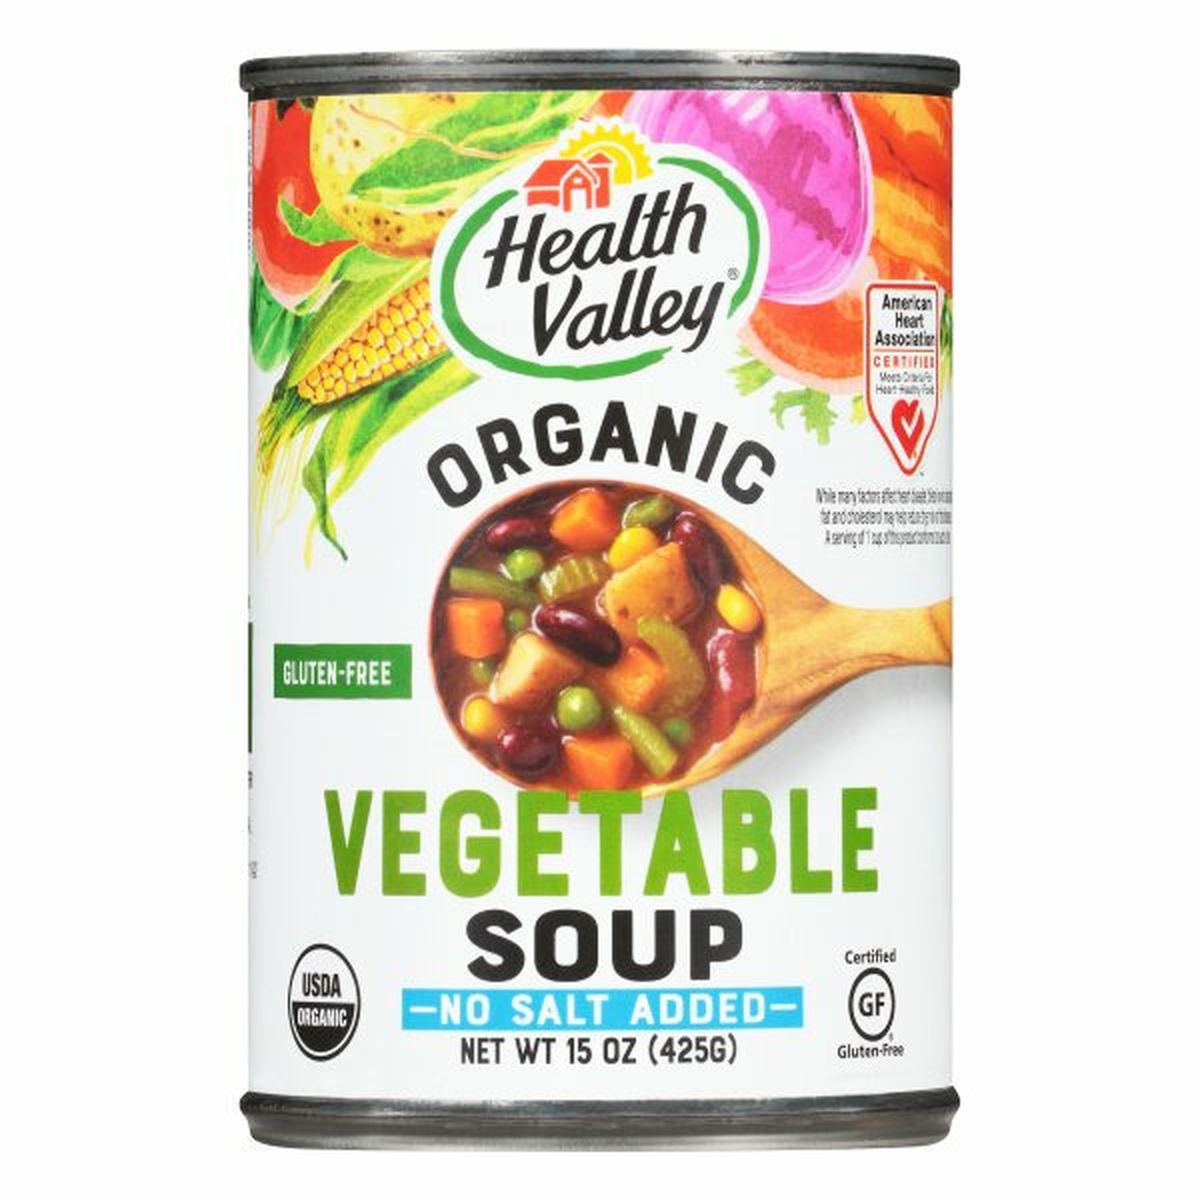 Calories in Health Valley Vegetable Soup, Organic